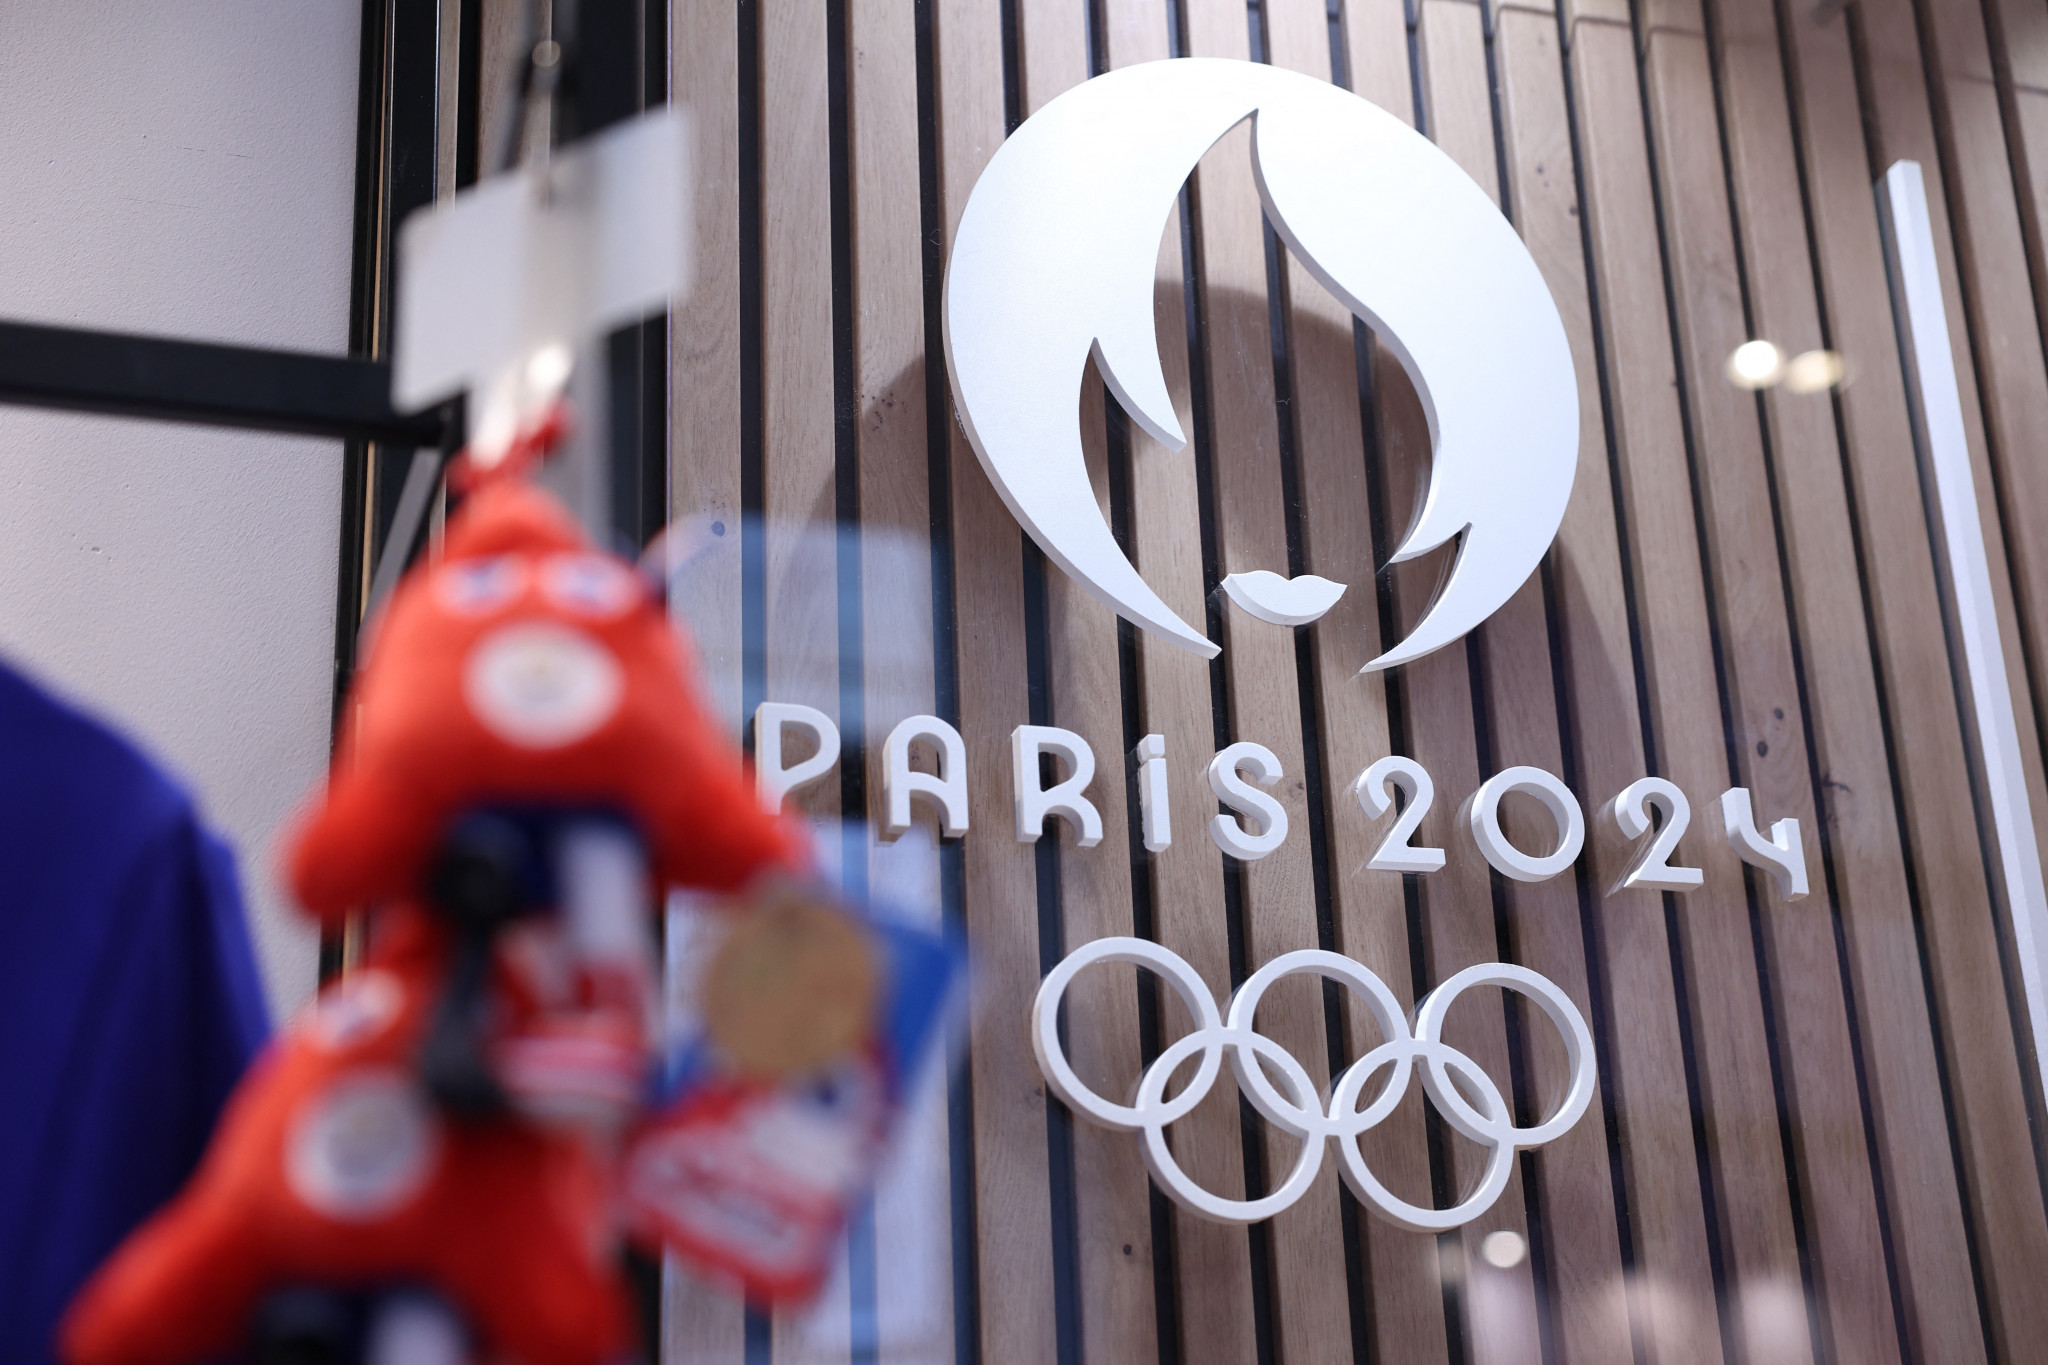 A Court of Auditors report has found many uncertainties and risks remain in the Paris 2024 budget ©Getty Images